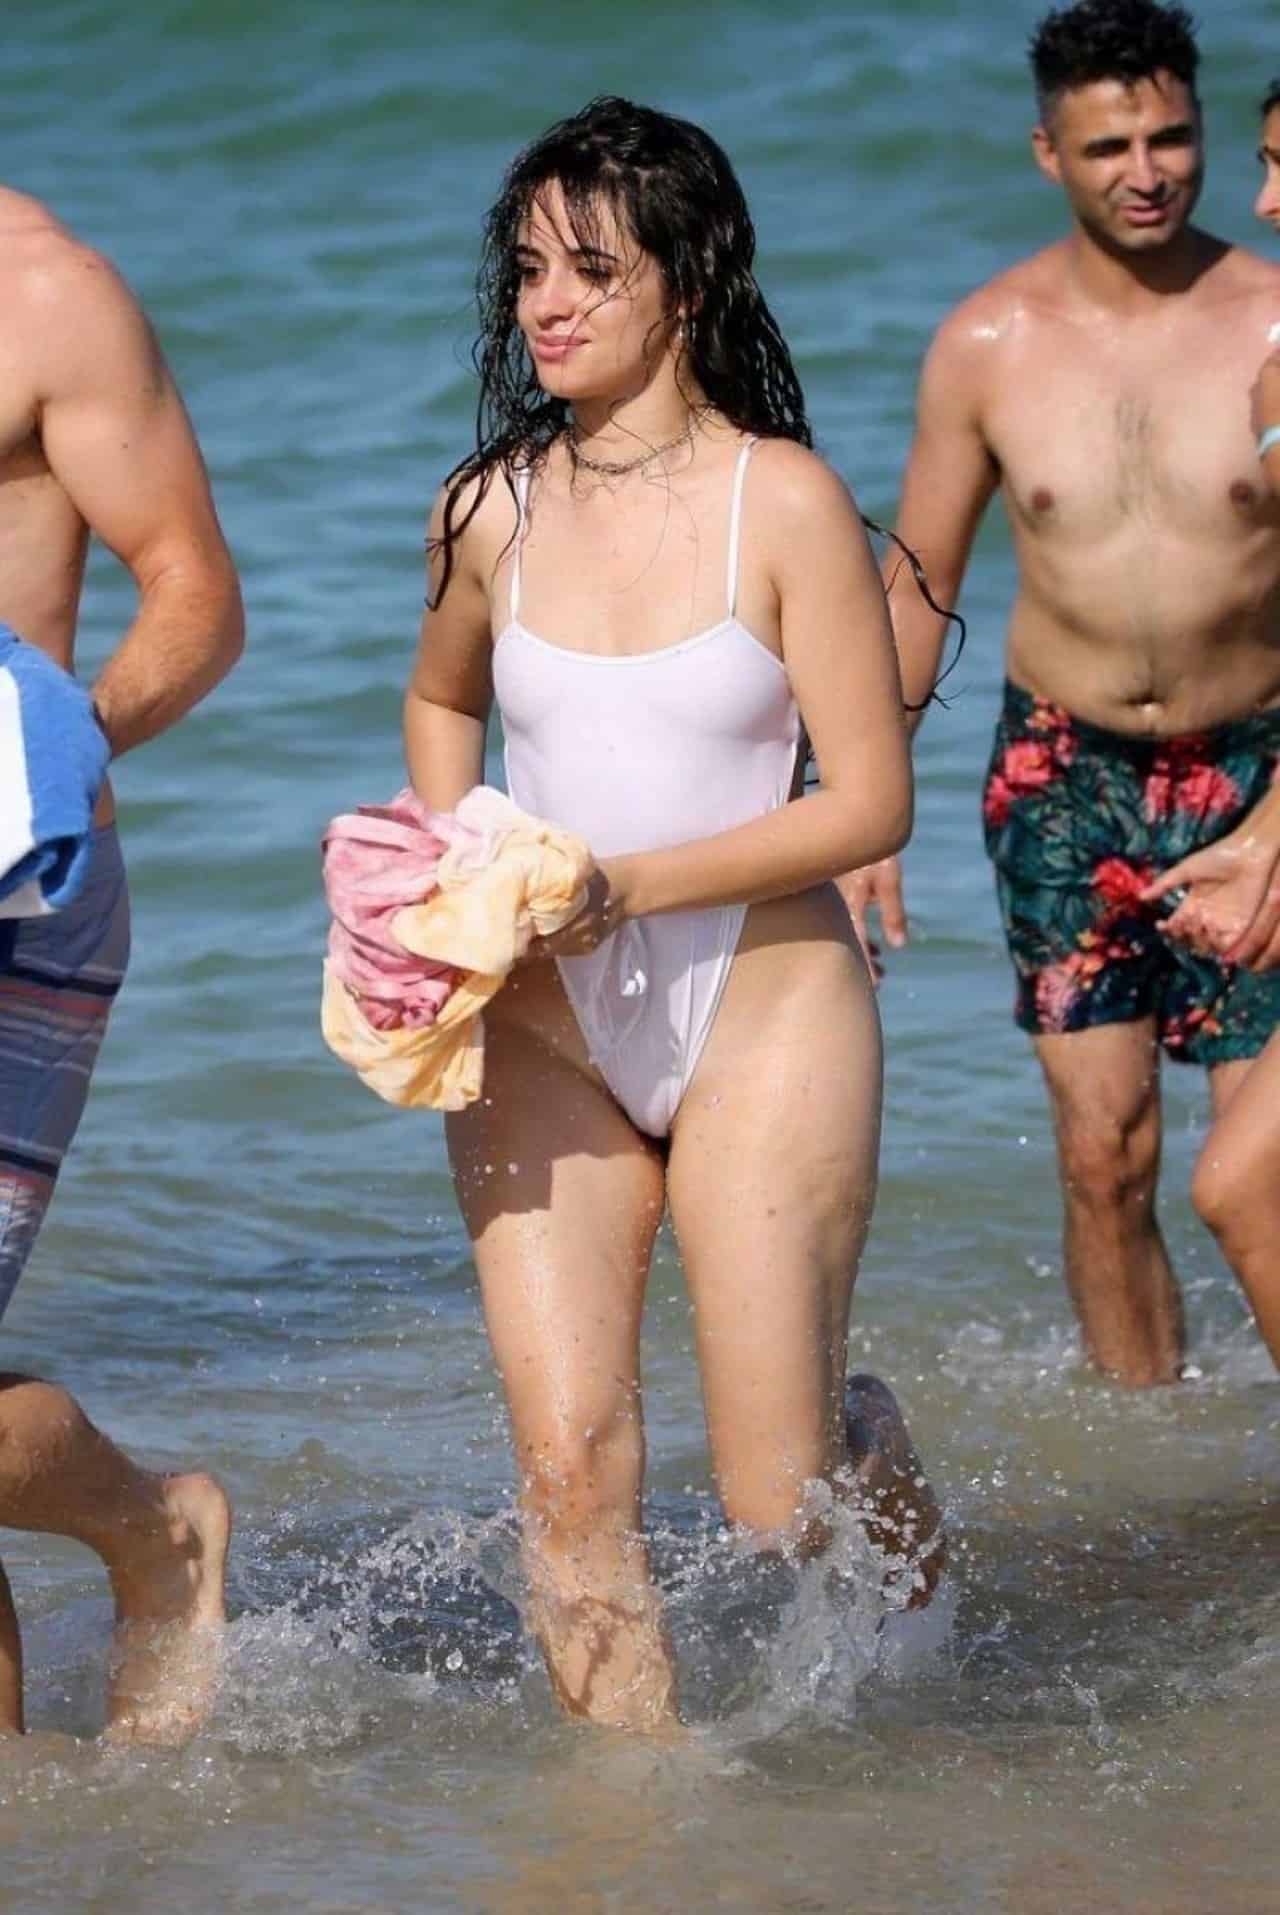 Camila Cabello Turns Up the Heat at the Beach in a White Swimsuit